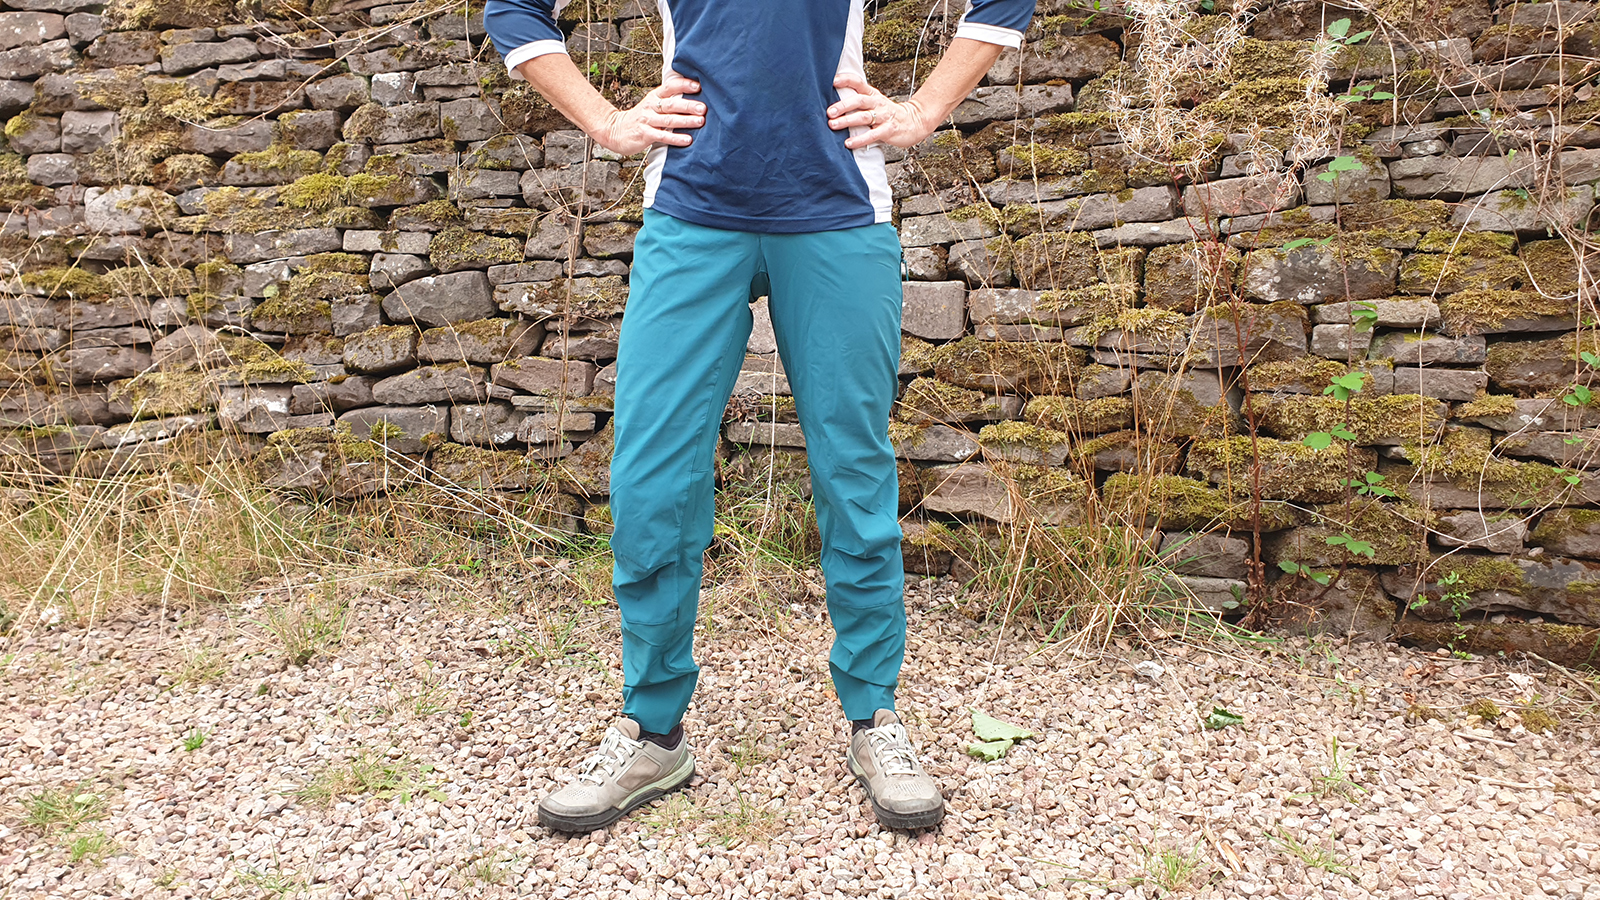 Rapha Men's Technical Trousers Review